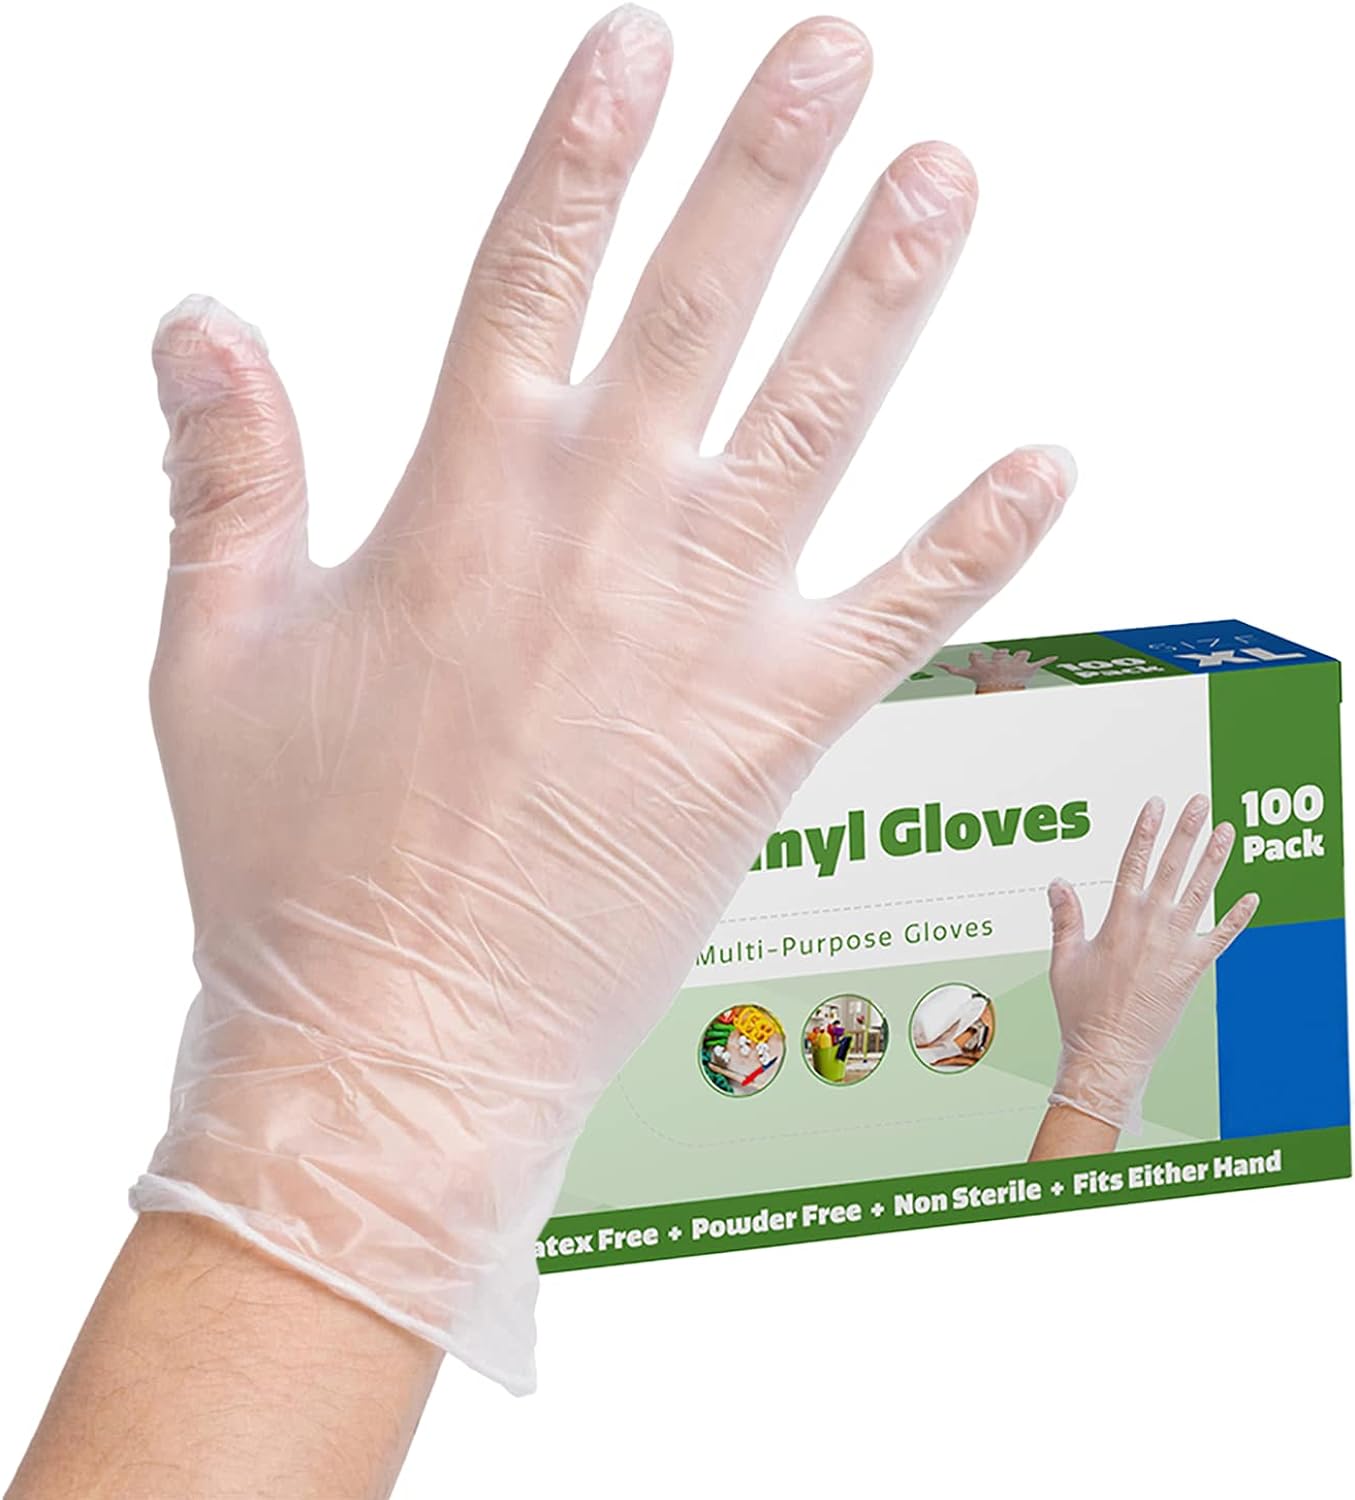 100 Pack] Clear Powder Free Vinyl Disposable Plastic Gloves